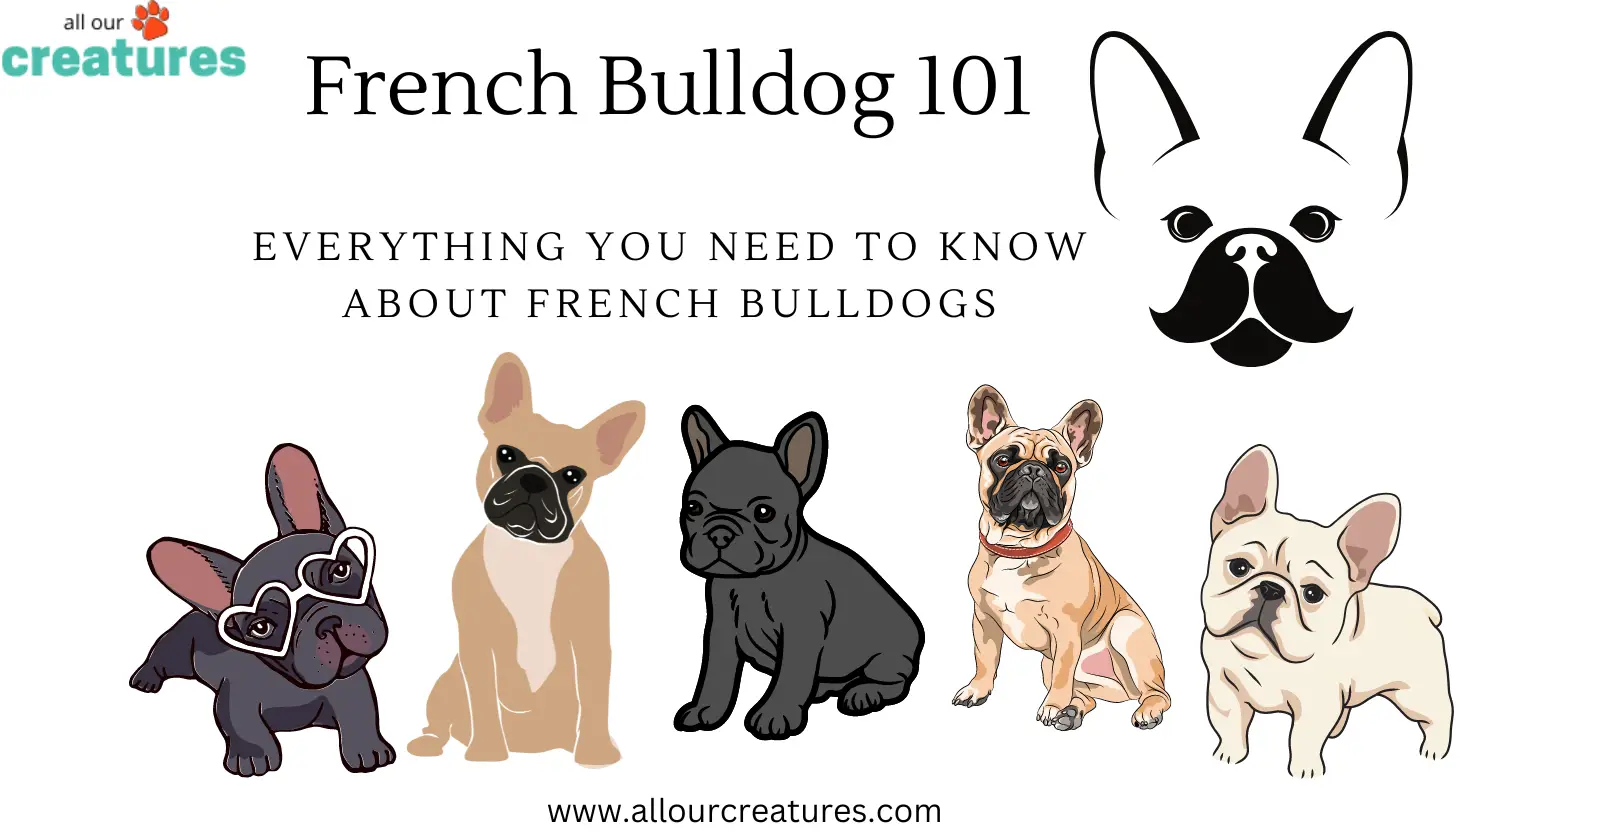 Discover the Top Foods: What Can French Bulldogs Eat